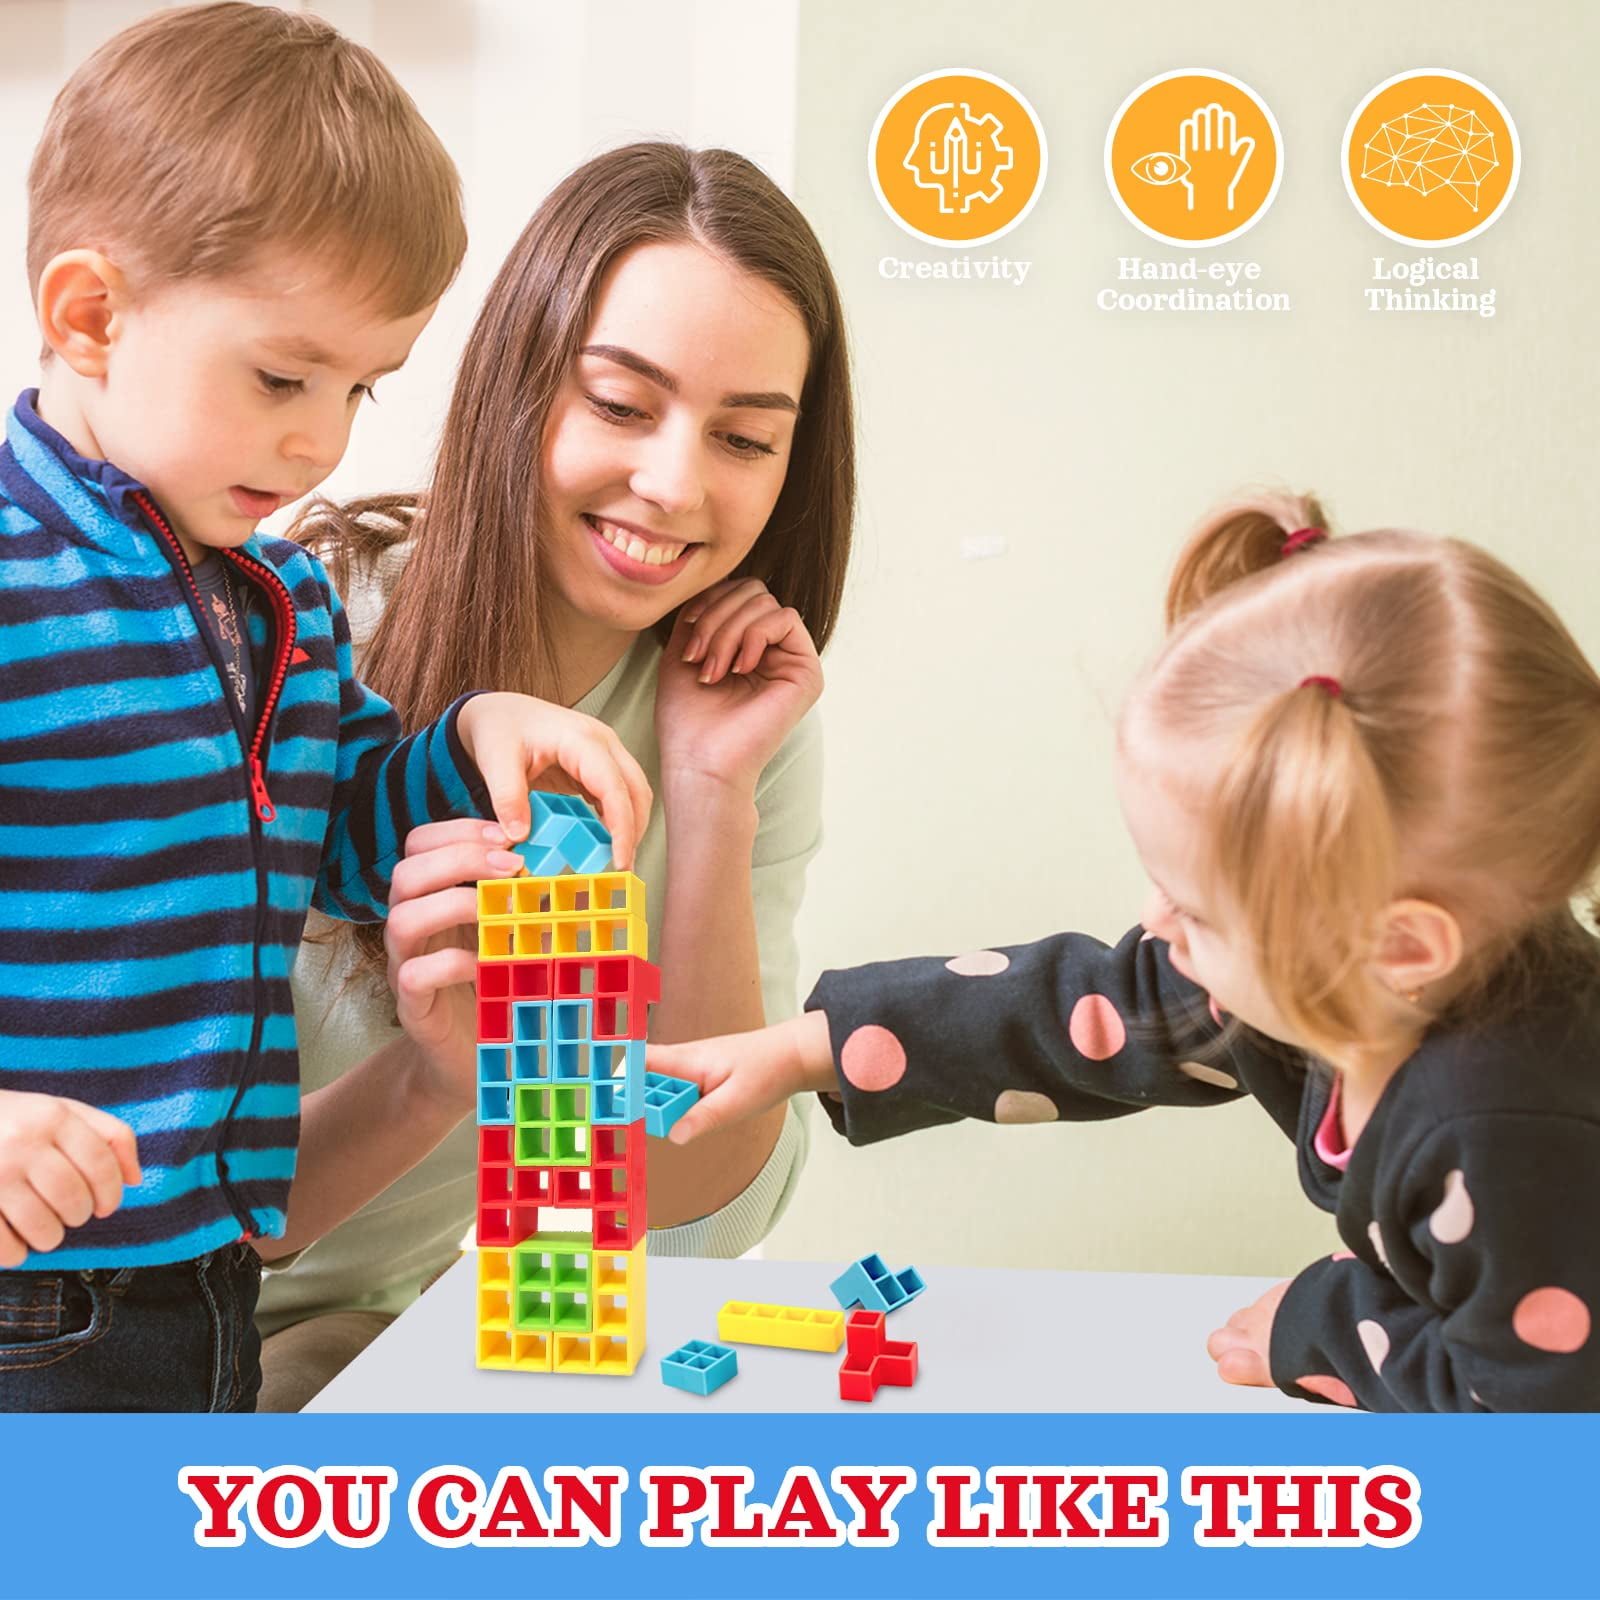 Tetra Tower Game,32 pcs Tetris Tower Balance Board Game for Kids Adults,  Brain Memory STEM Toys Games for Family Night, Parties, Travel, Christmas